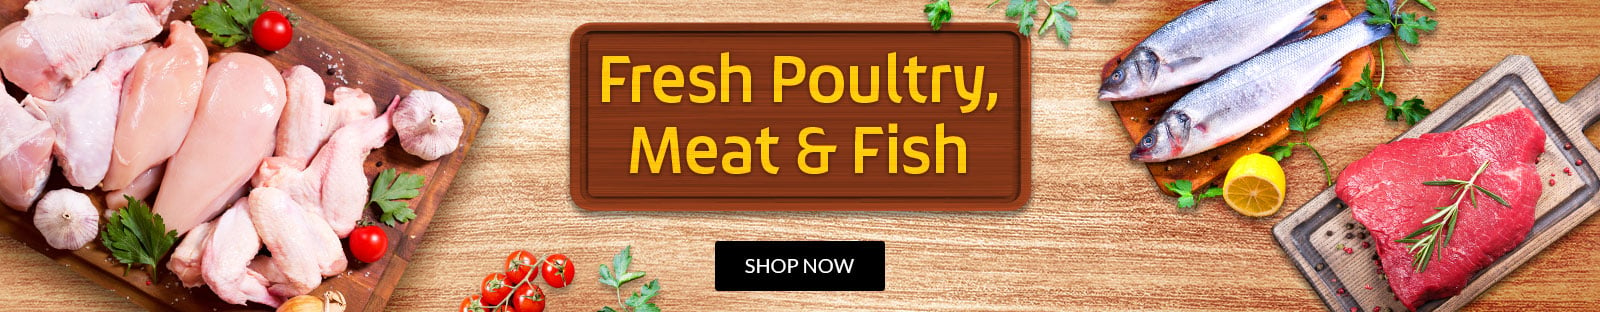 Fresh Poultry Meat & Fish